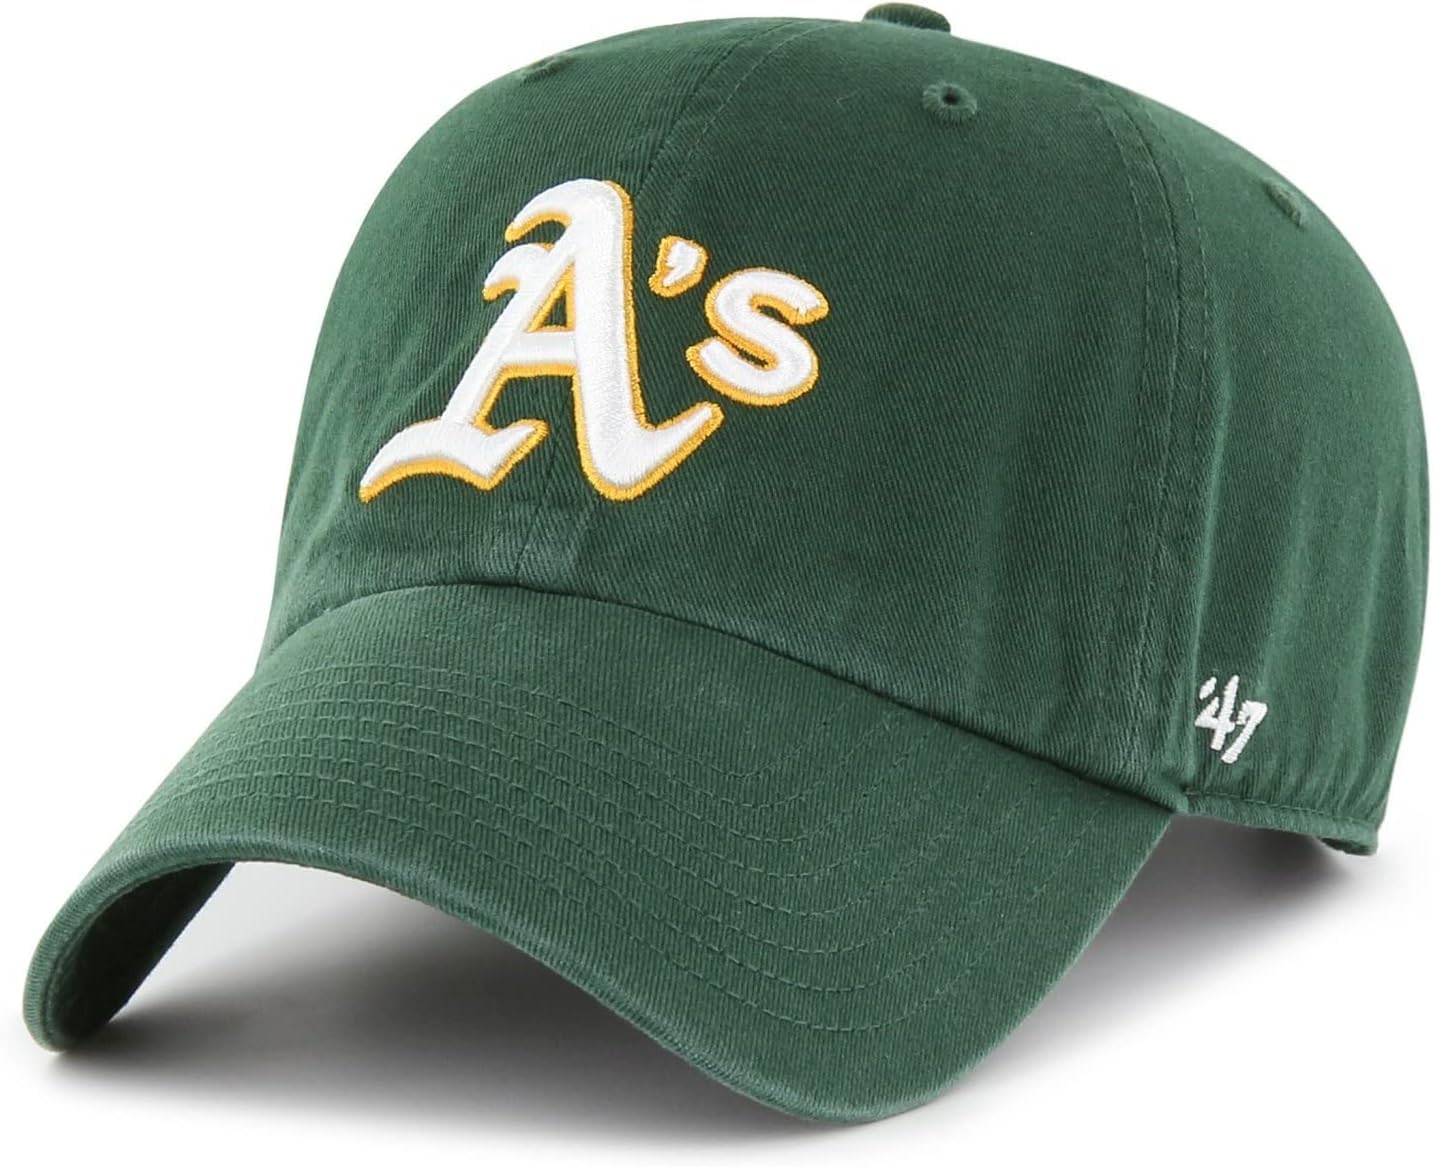 '47 MLB Home Team Color Primary Logo Clean Up Adjustable Strap Hat Cap, Adult One Size Fits All (Oakland Athletics) - Caps Fitted